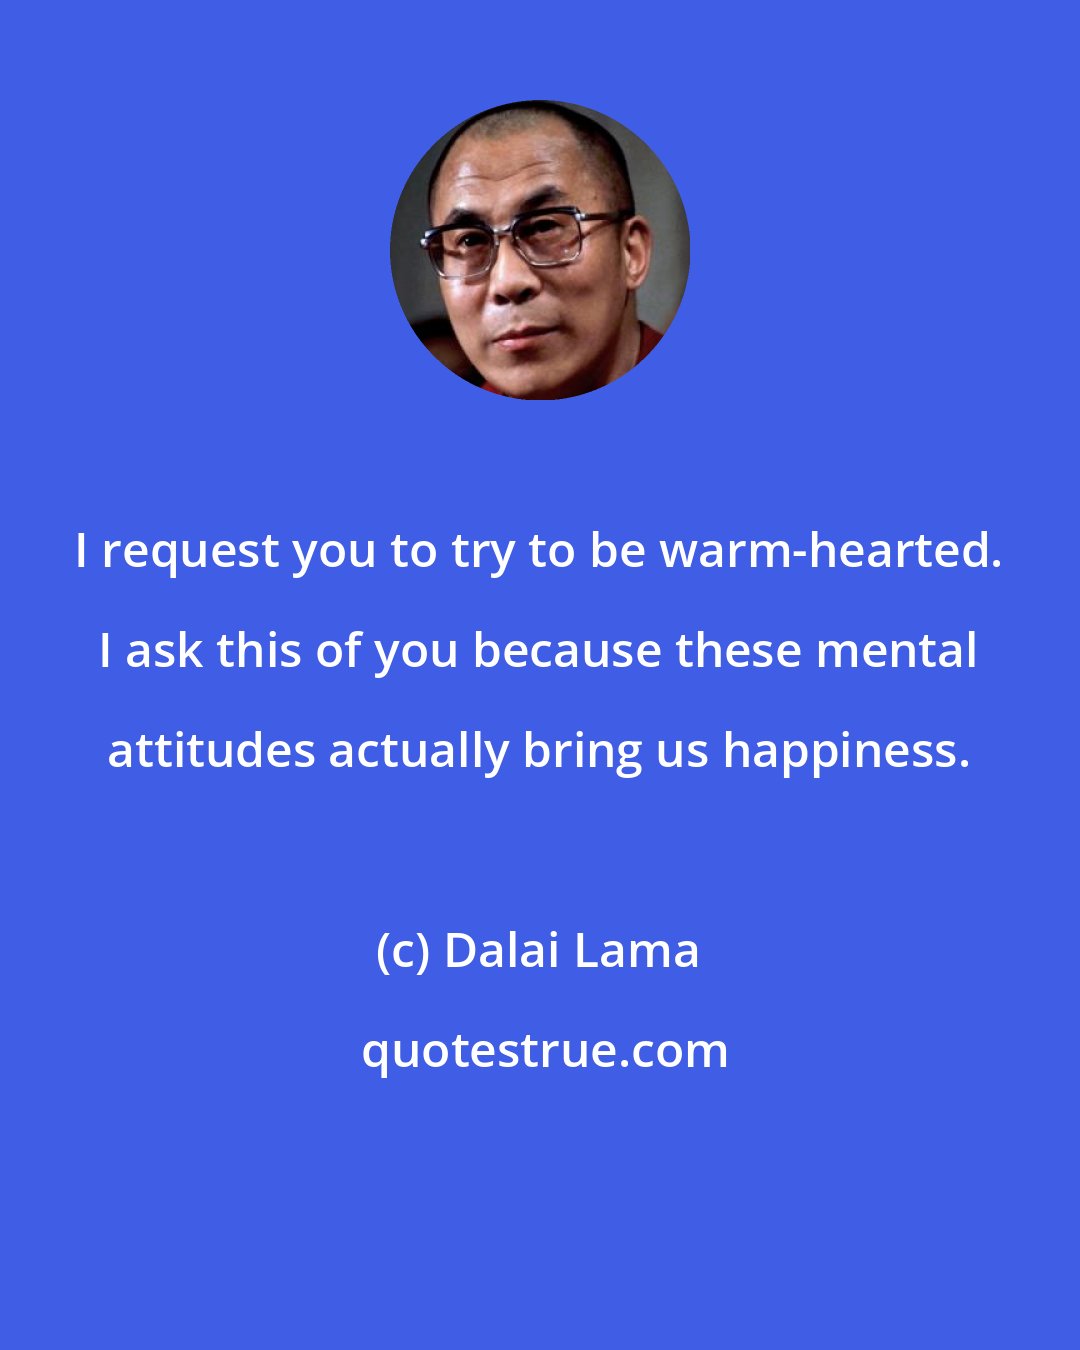 Dalai Lama: I request you to try to be warm-hearted. I ask this of you because these mental attitudes actually bring us happiness.